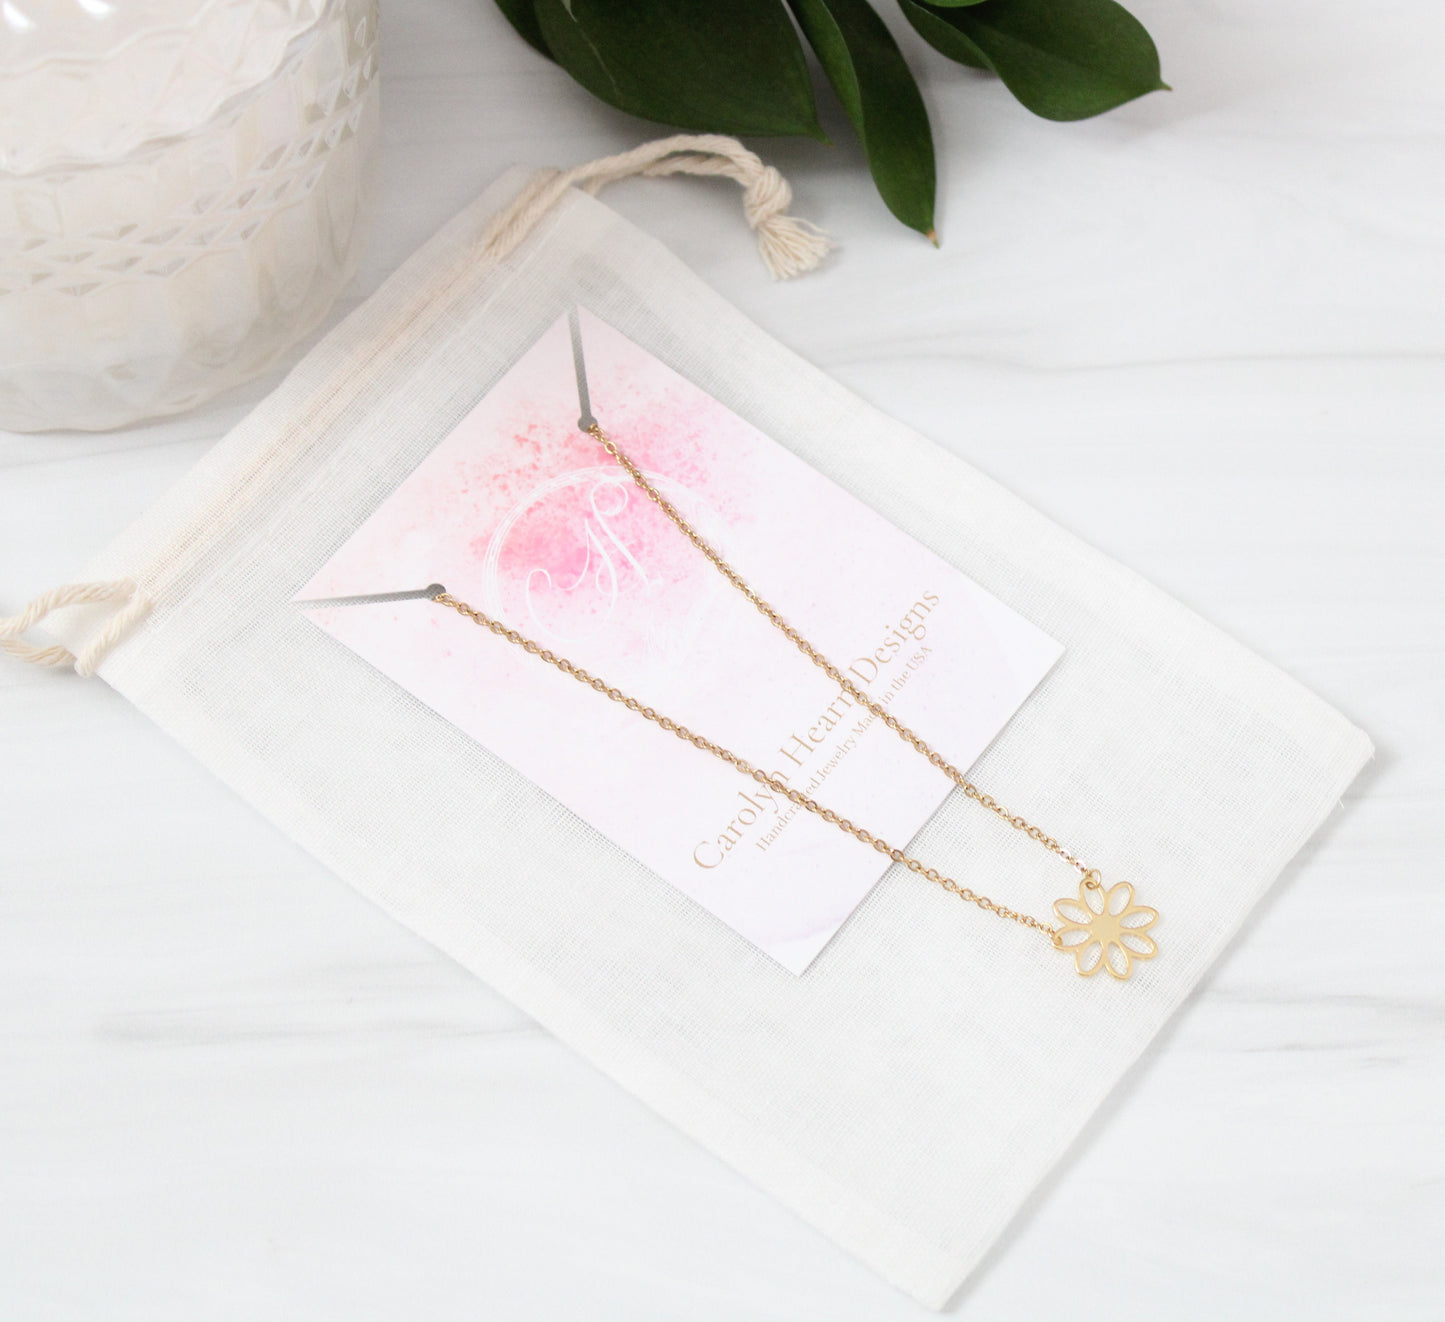 Bloom Flower Necklace in Gold